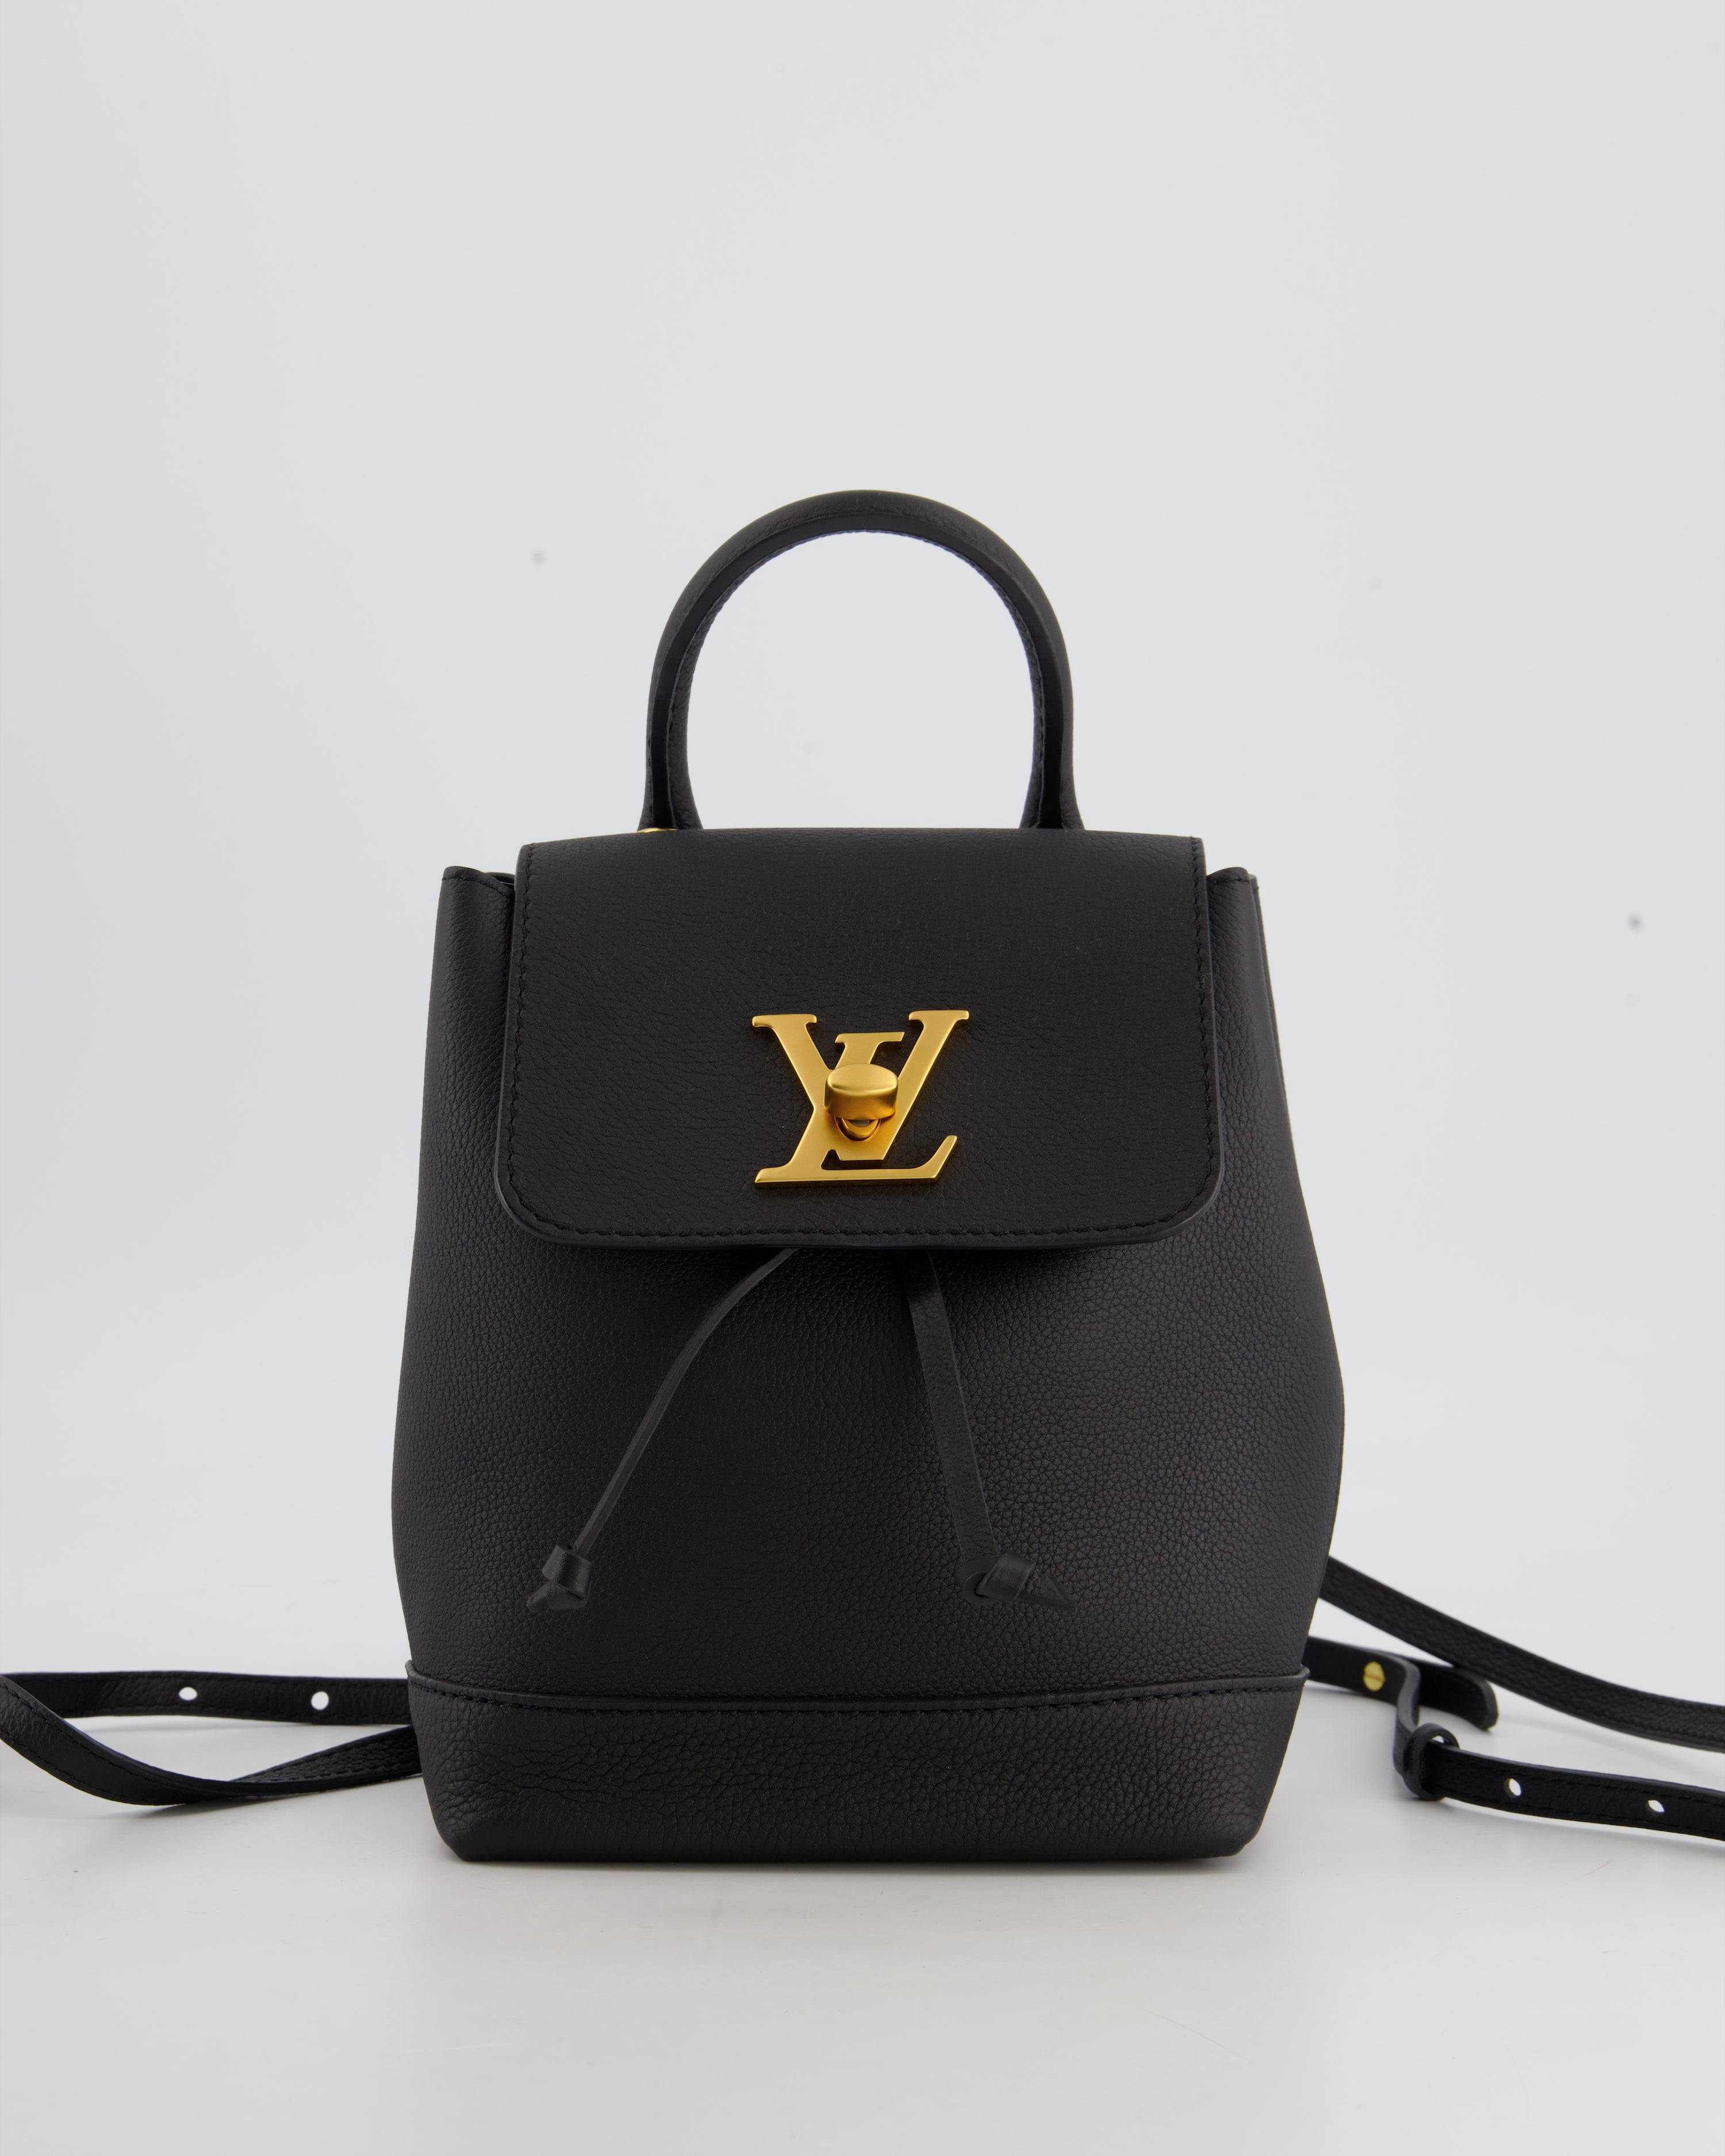 Louis Vuitton Black Mini Lock Me Backpack Bag in Grained Leather